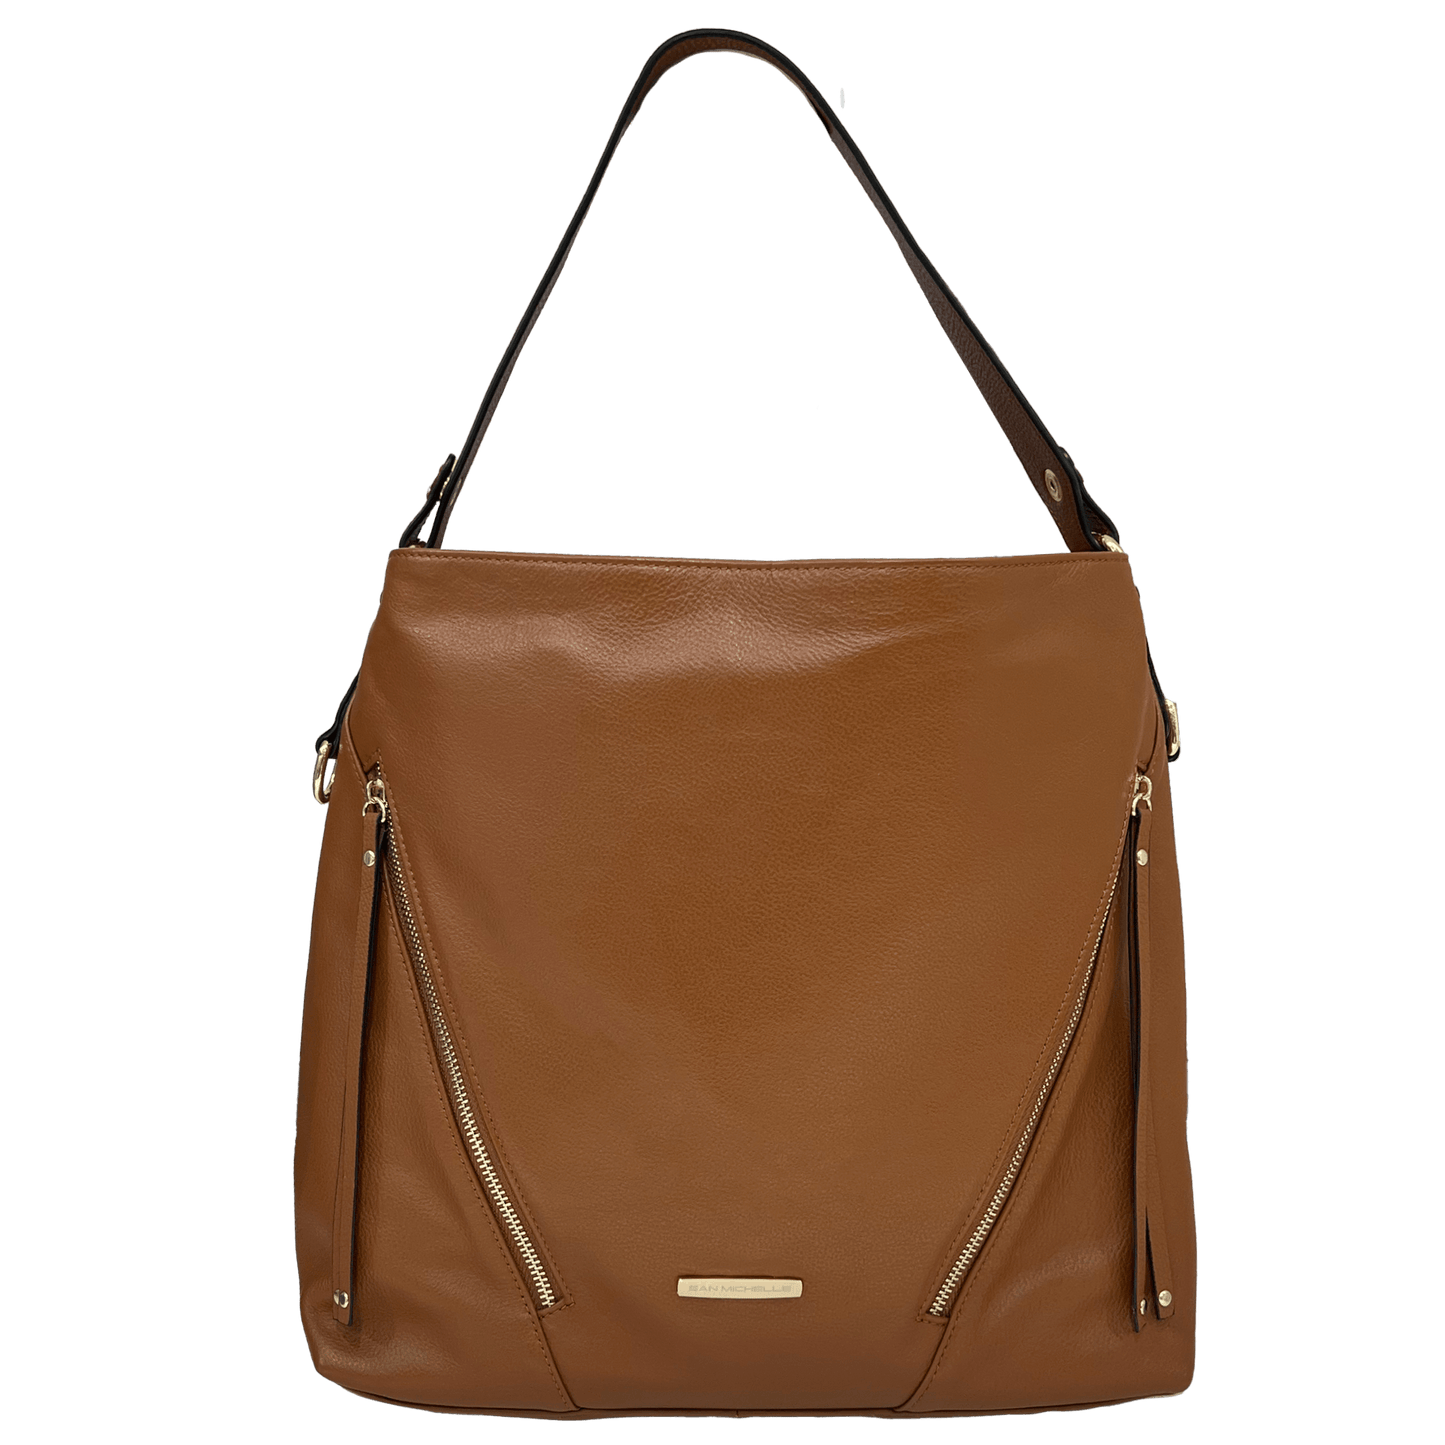 Shelly Leather Hobo Bag - San Michelle Bags suitcase nz